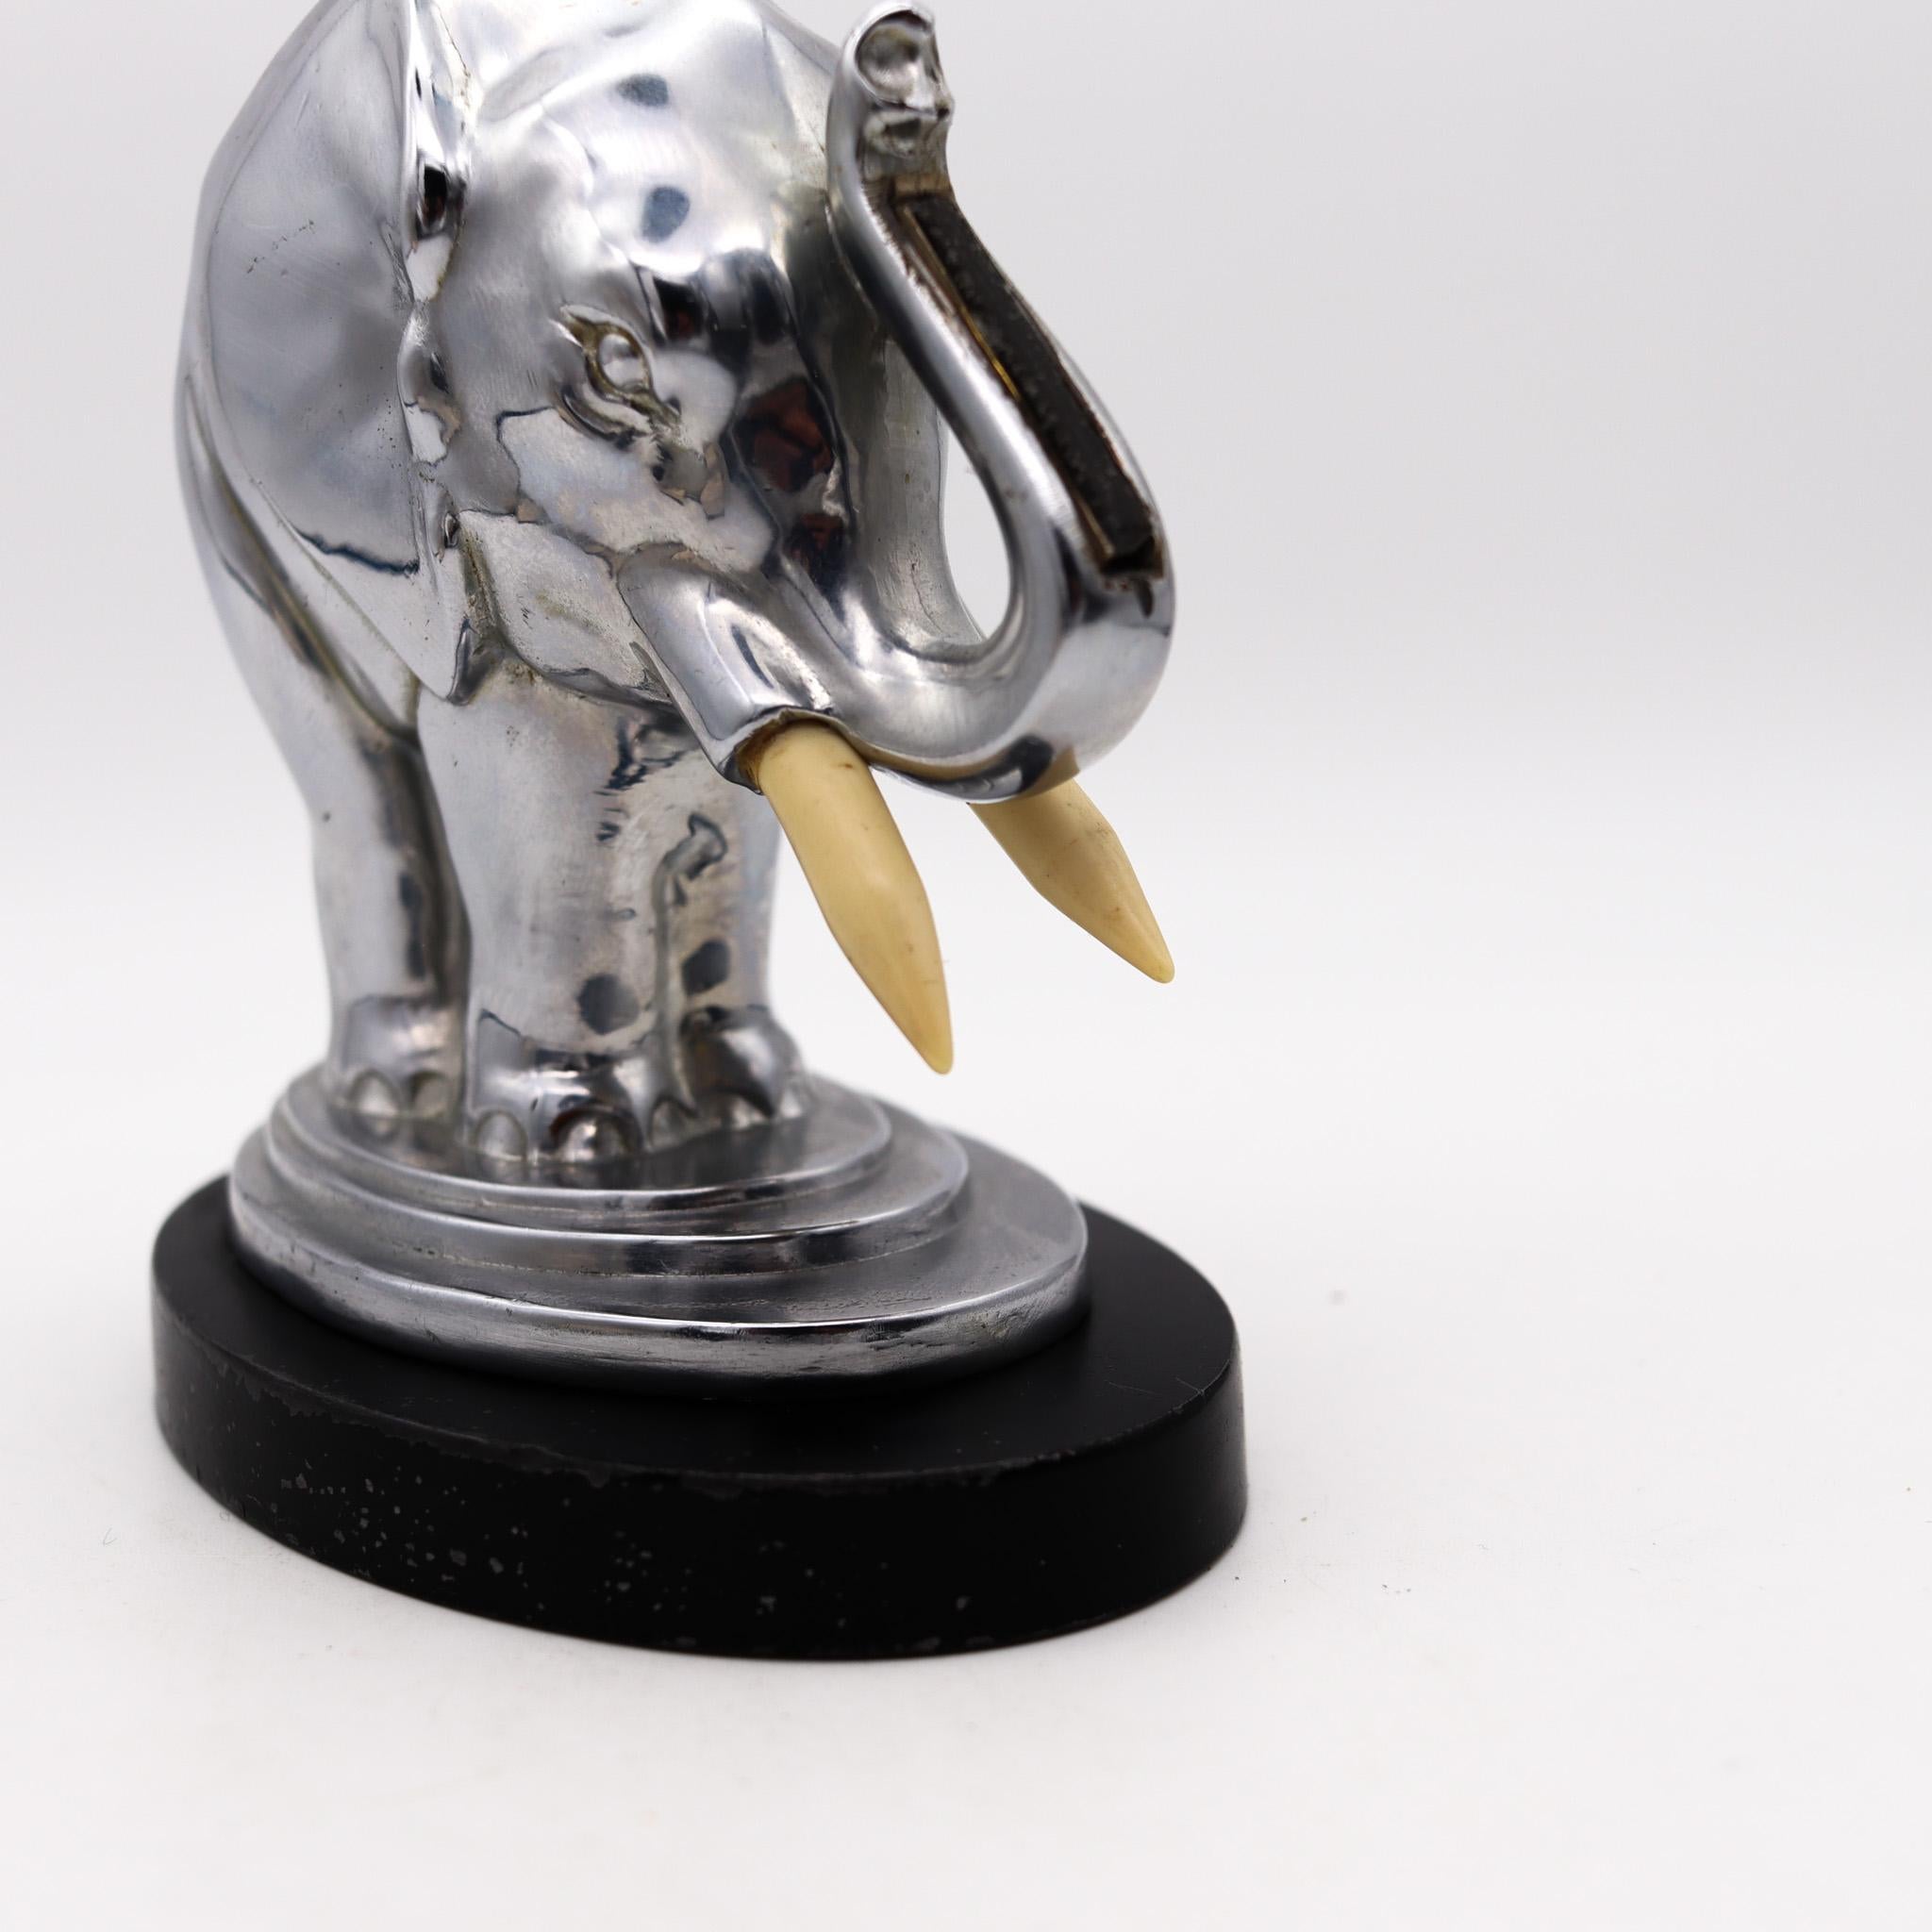 Mid-20th Century Ronson 1935 Elephant Touch Titp Striker Lighter In Black Cast Steel And Chrome